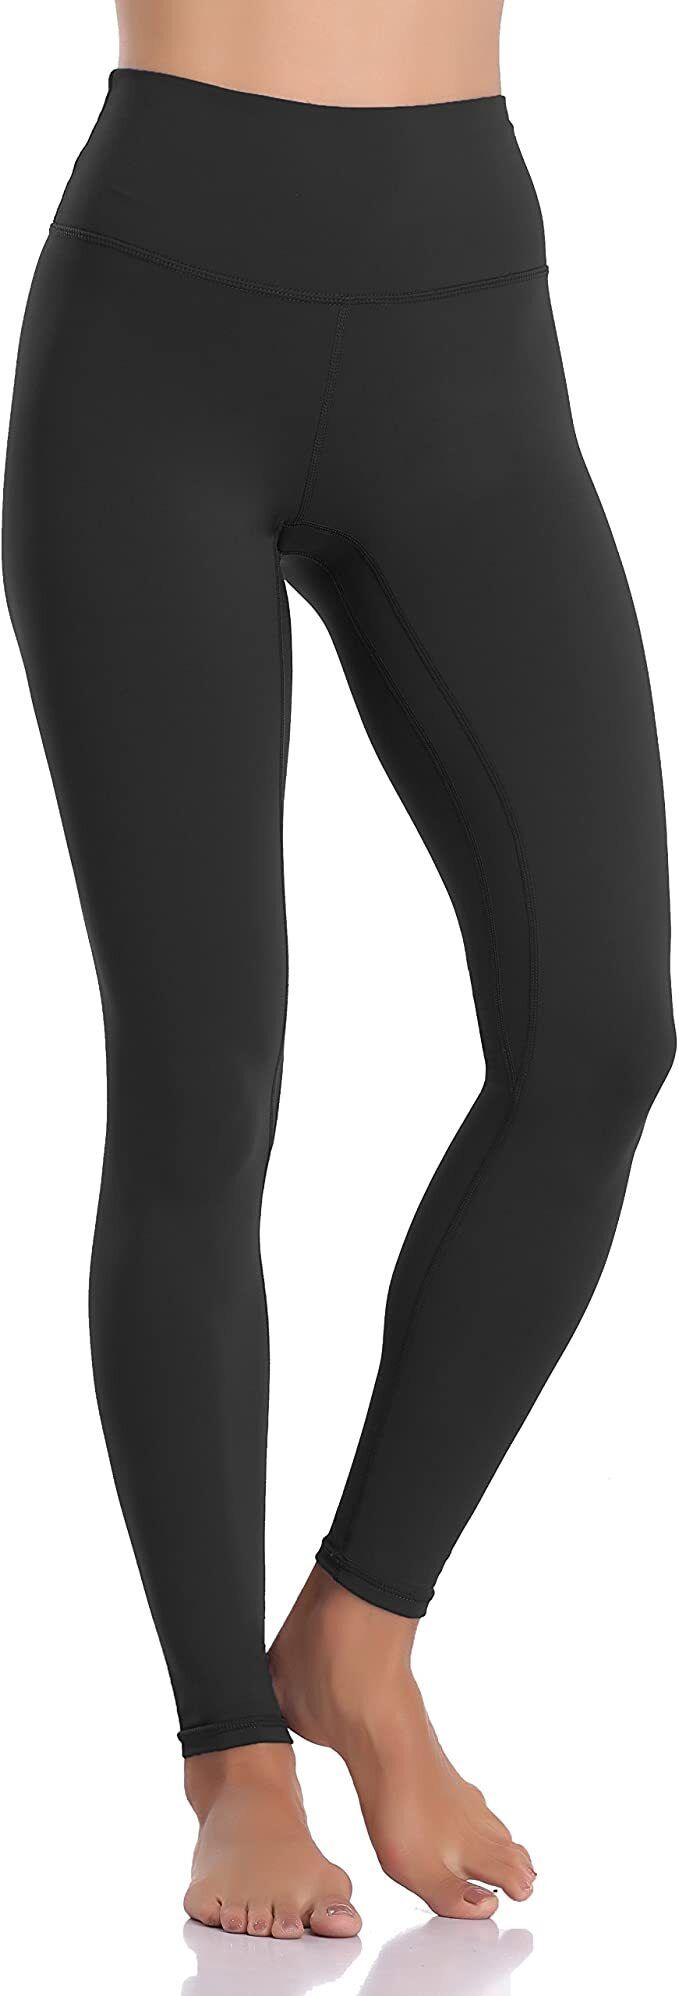 Buttery soft' gym leggings that have people ditching their